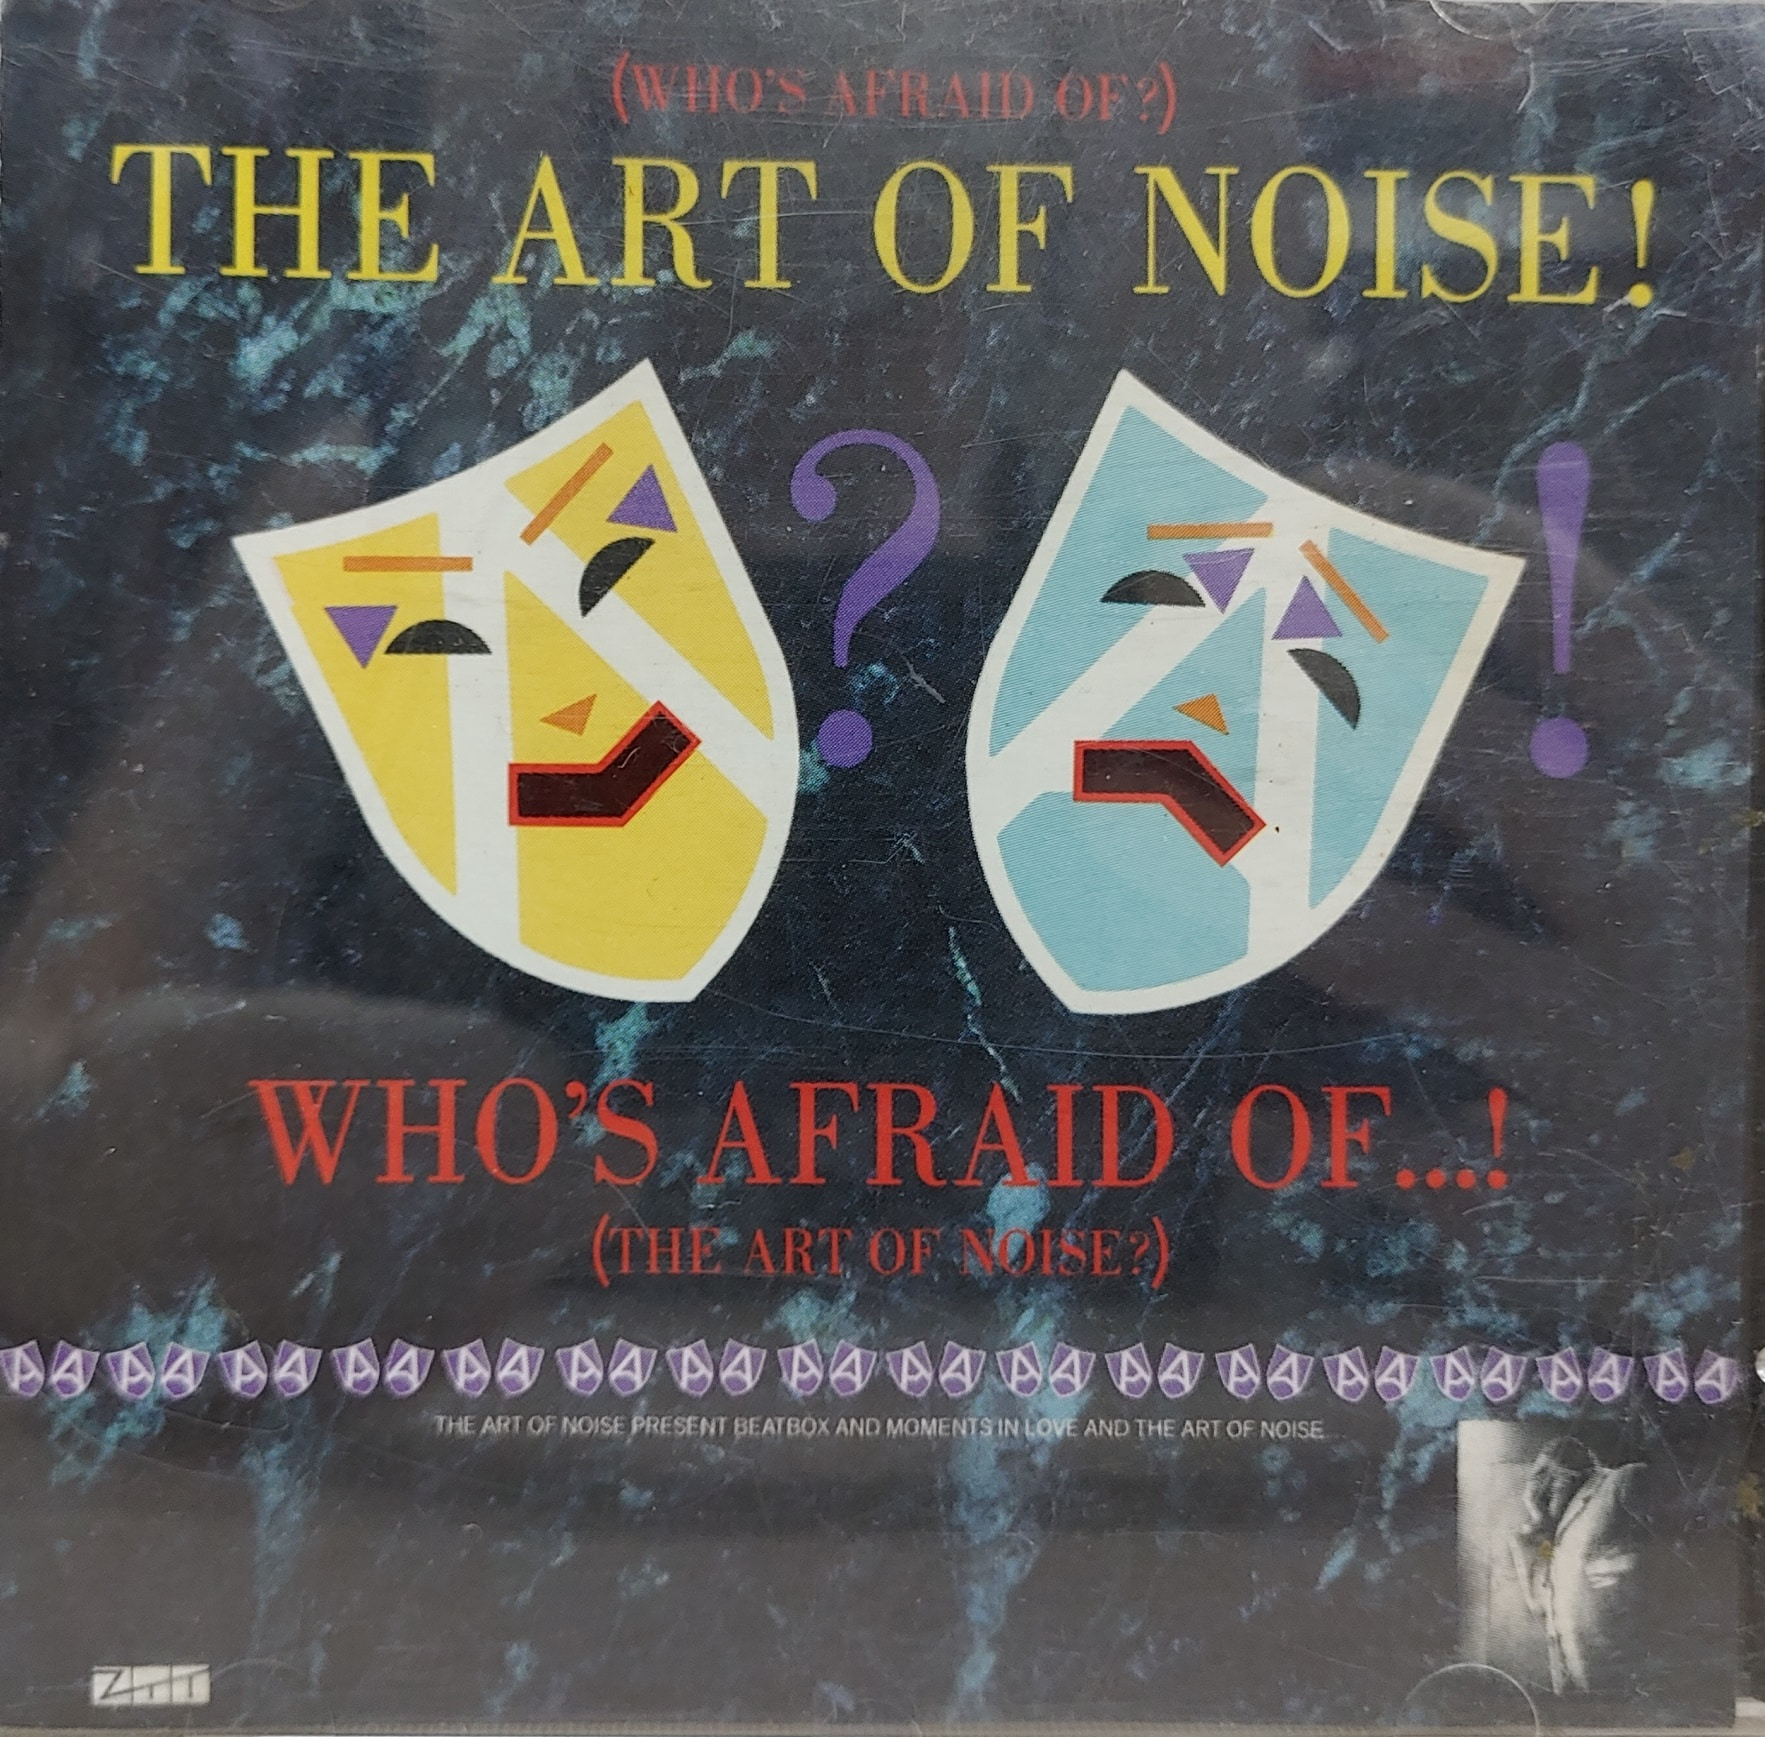 THE ART OF NOISE